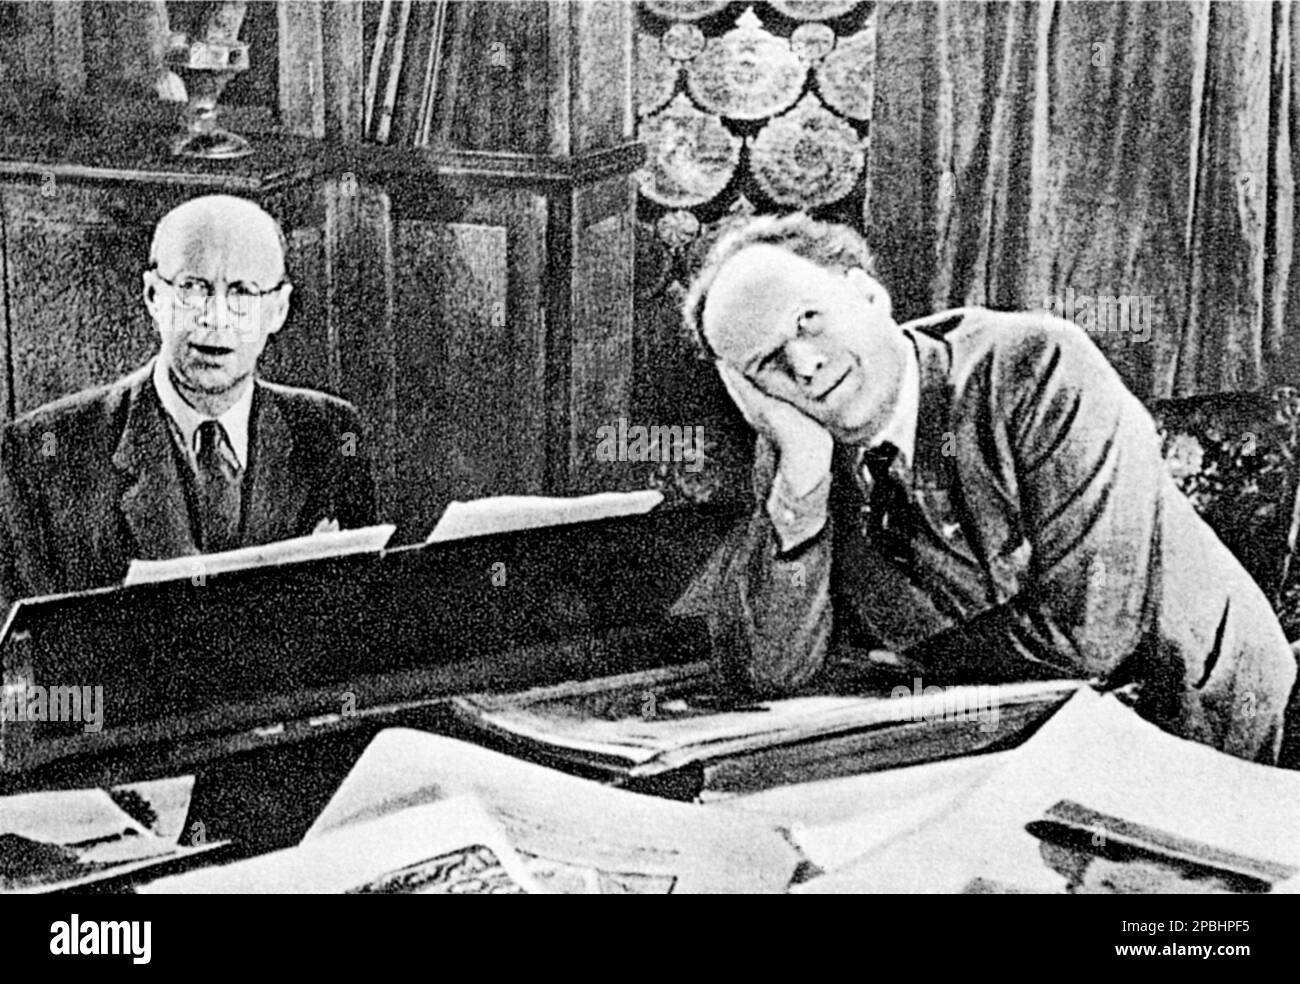 1943 ca : The russian music composer SERGEJ PROKOFIEV ( Sergej Sergeevic Prokof'ev,  1891 - 1953 ) with the silen movie russian director SERGEI EJZENSTEJN ( Eizenshtein ,  Eisenstein , 1898 - 1948 ) , study the music for the movie IVAN THE TERRIBLE ( Ivan il terribile -1944 ) . Prokofiev was a Russian composer who mastered numerous musical genres and came to be admired as one of the greatest composers of the 20th century . Eisenstein was a revolutionary Soviet Russian film director and film theorist noted in particular for his silent films Strike, Battleship Potemkin and October, as well as hi Stock Photo